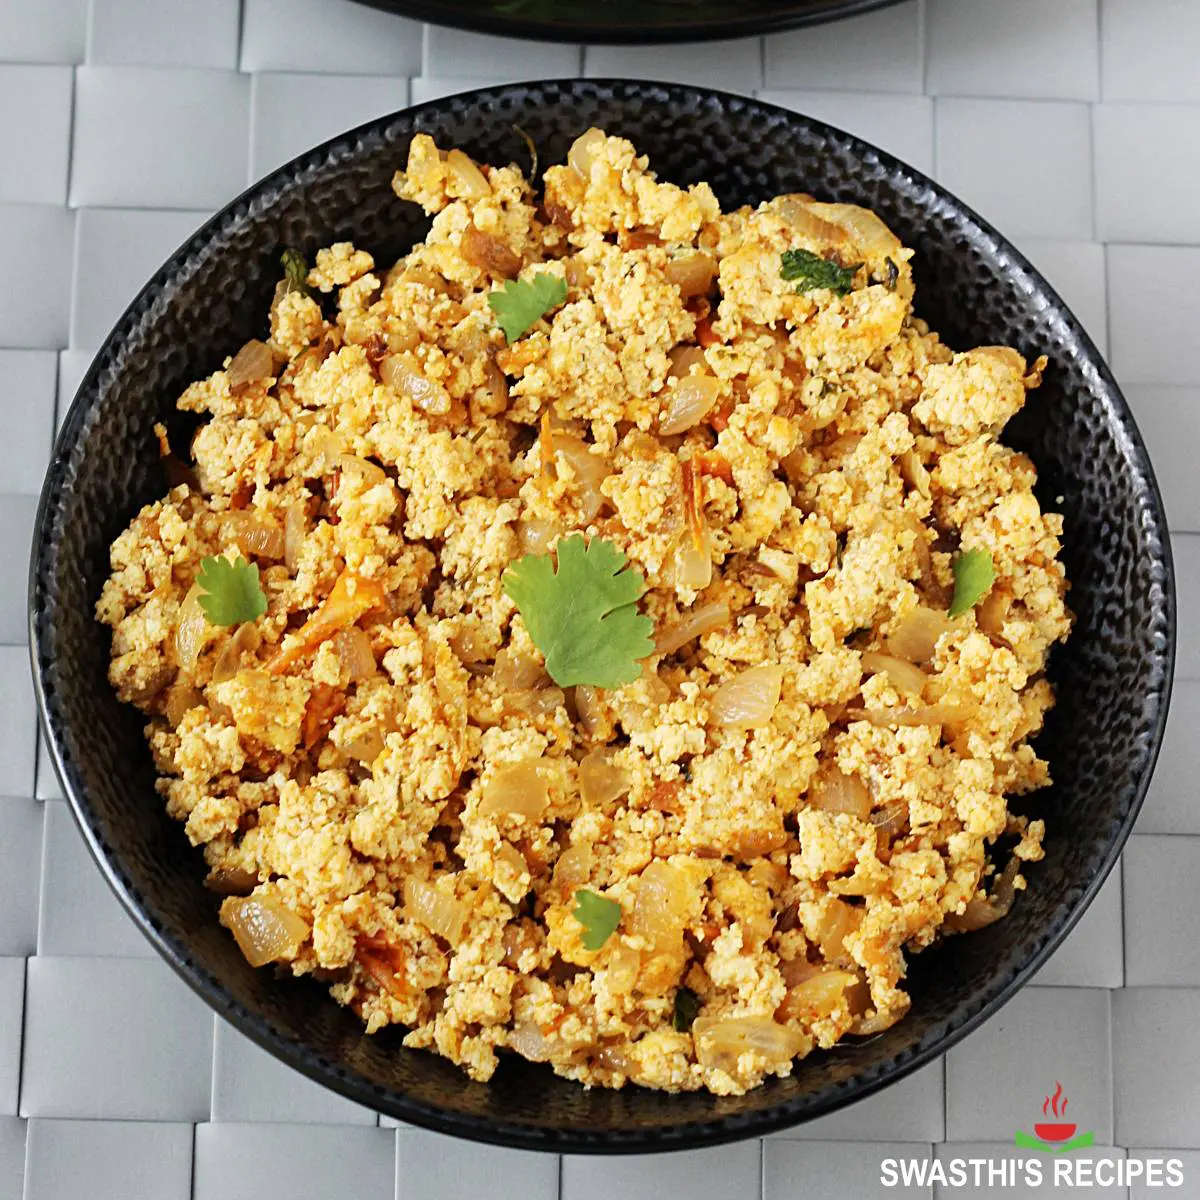 Paneer bhurji recipe made with Indian cheese, spices and herbs